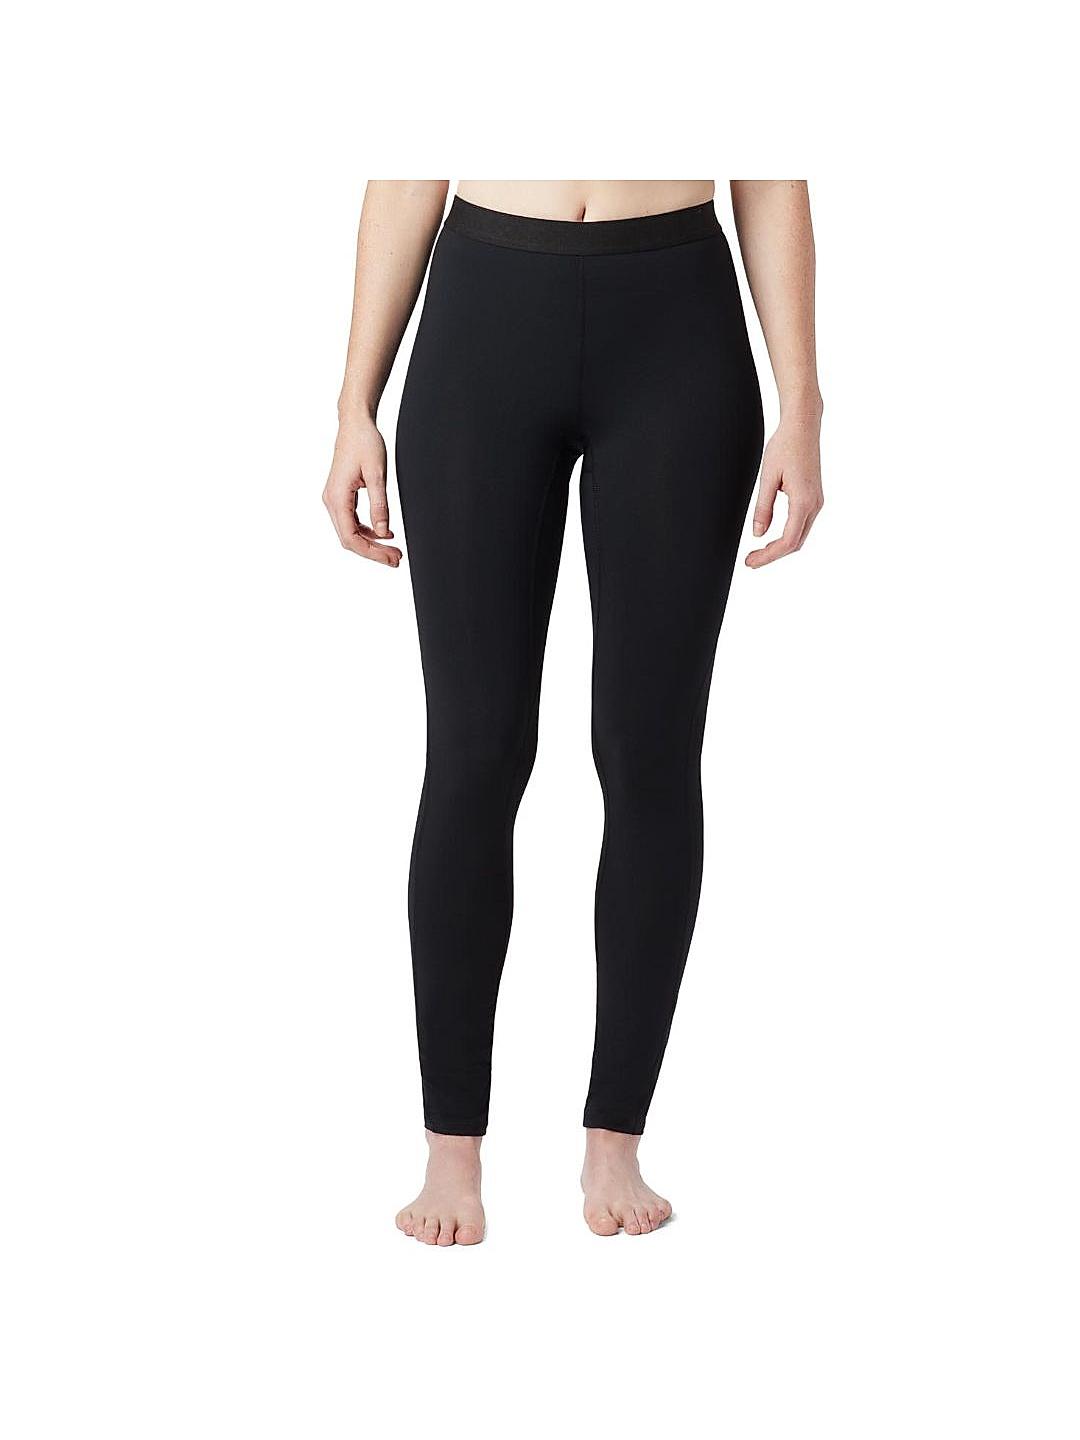 Womens Best $10 Black Leggings | Yoga Pants | Footless Tights – MomMe and  More-anthinhphatland.vn